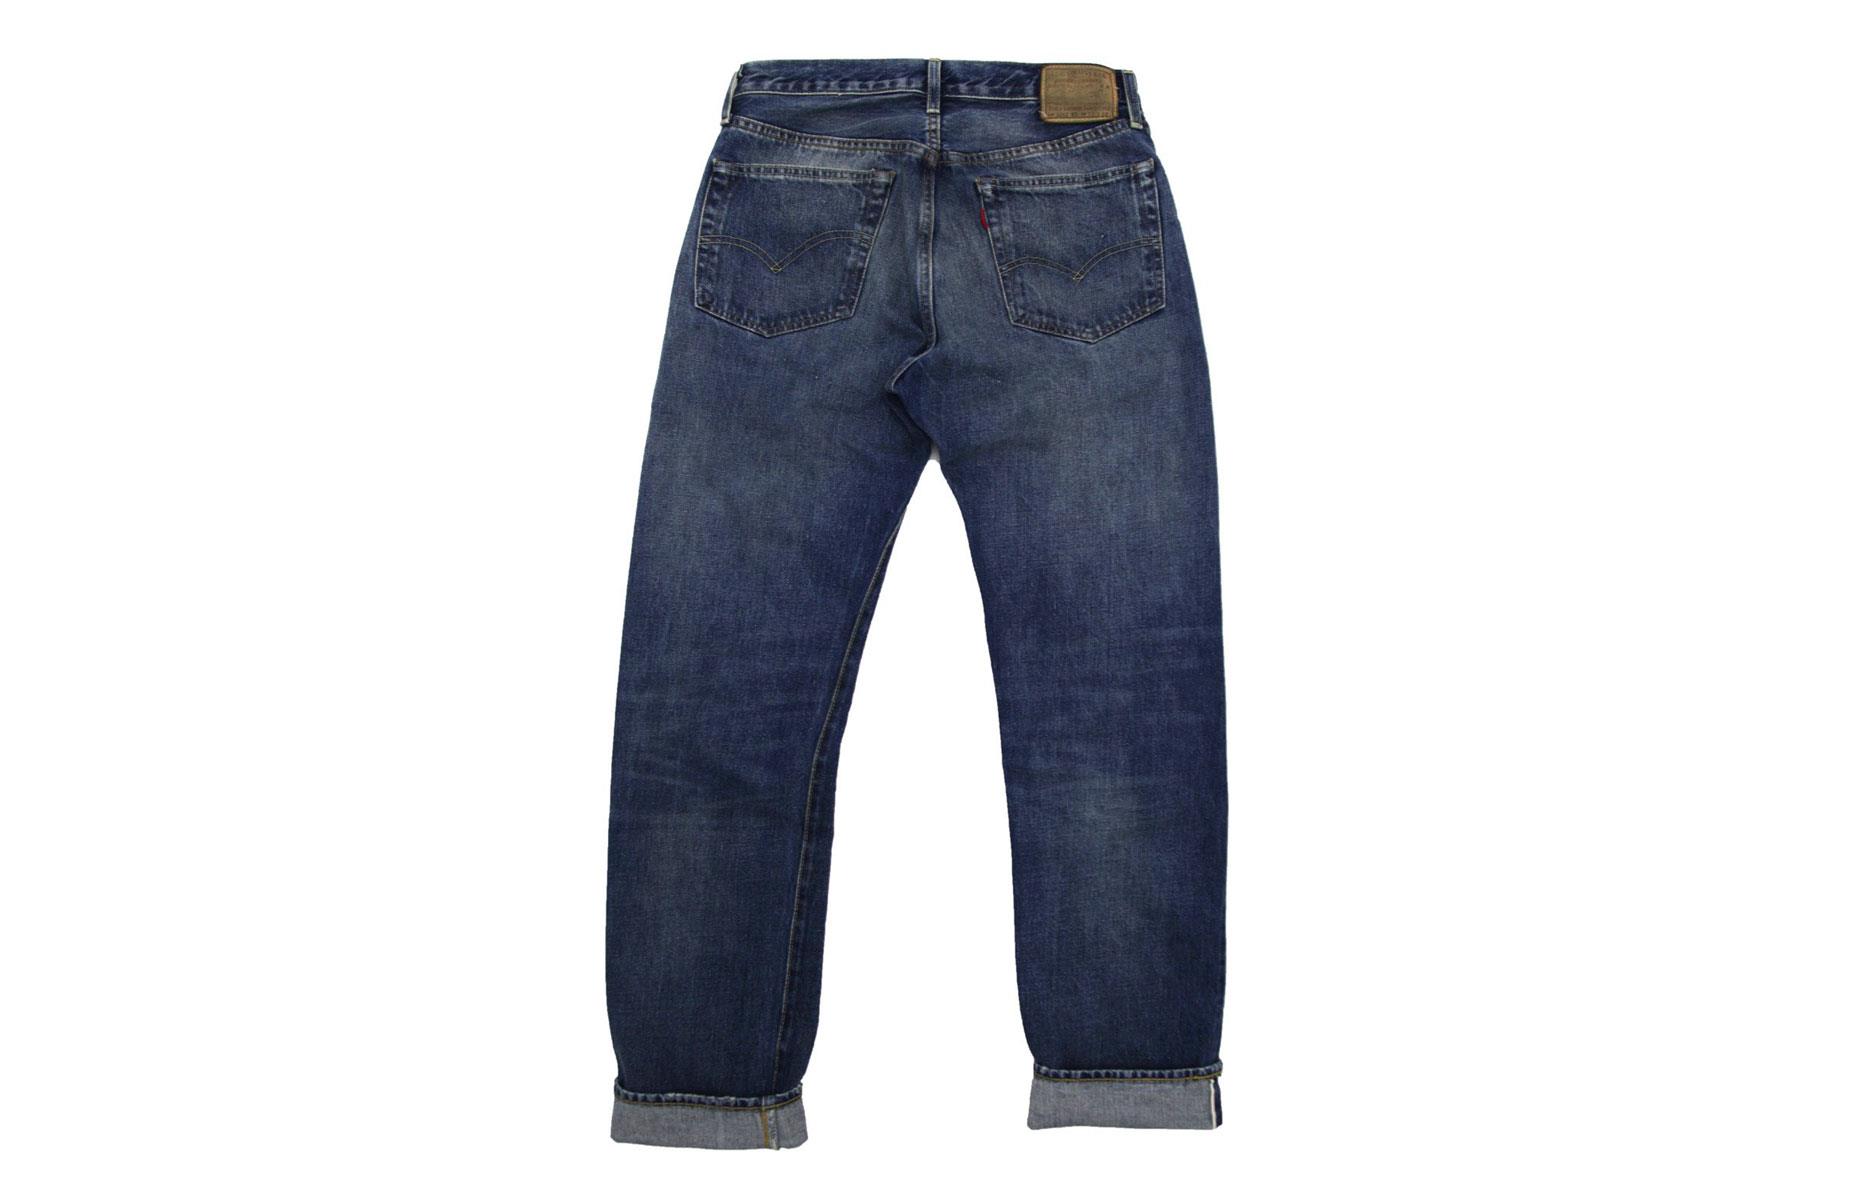 1954 – Levi's 501 First Edition: $2,000 (£1.5k)